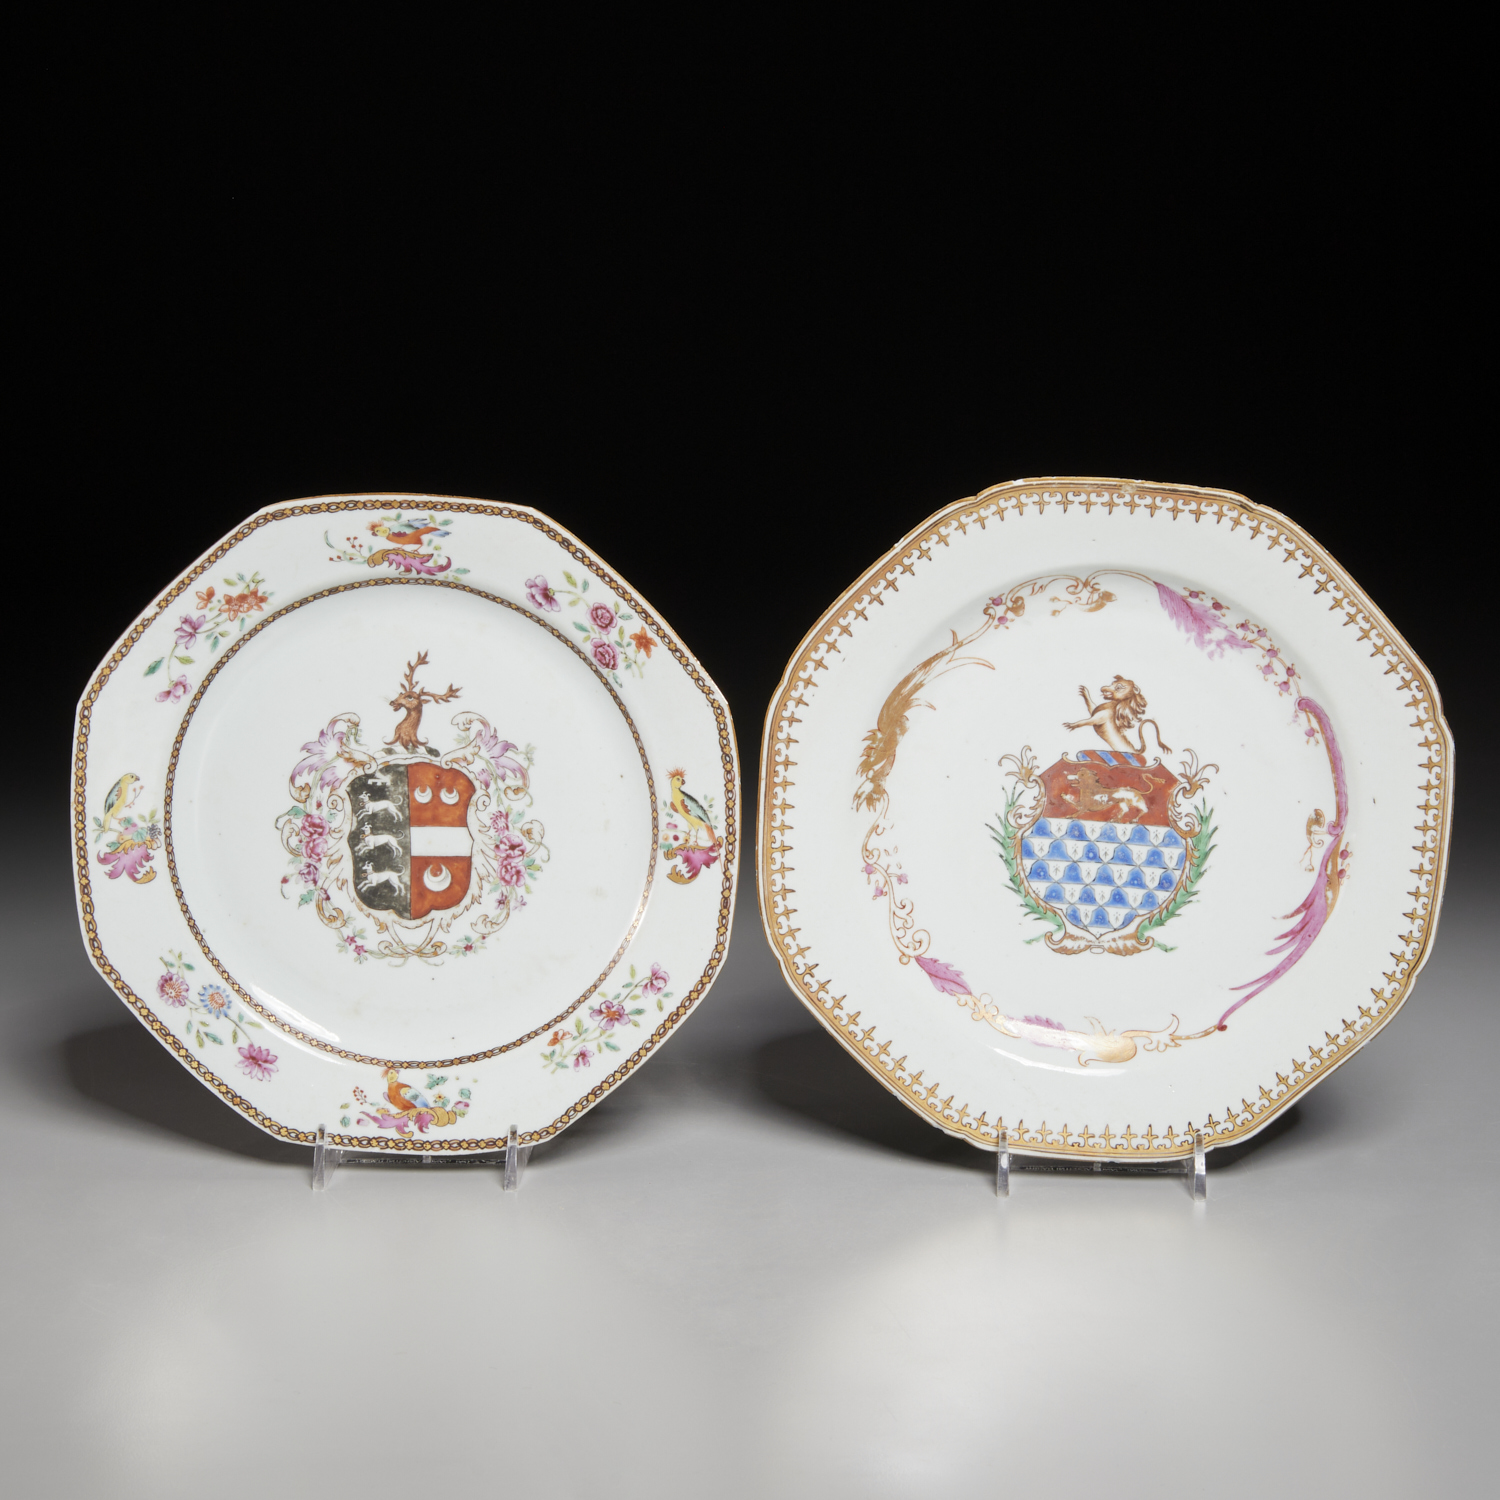  2 CHINESE EXPORT ARMORIAL PLATES 2fab0f